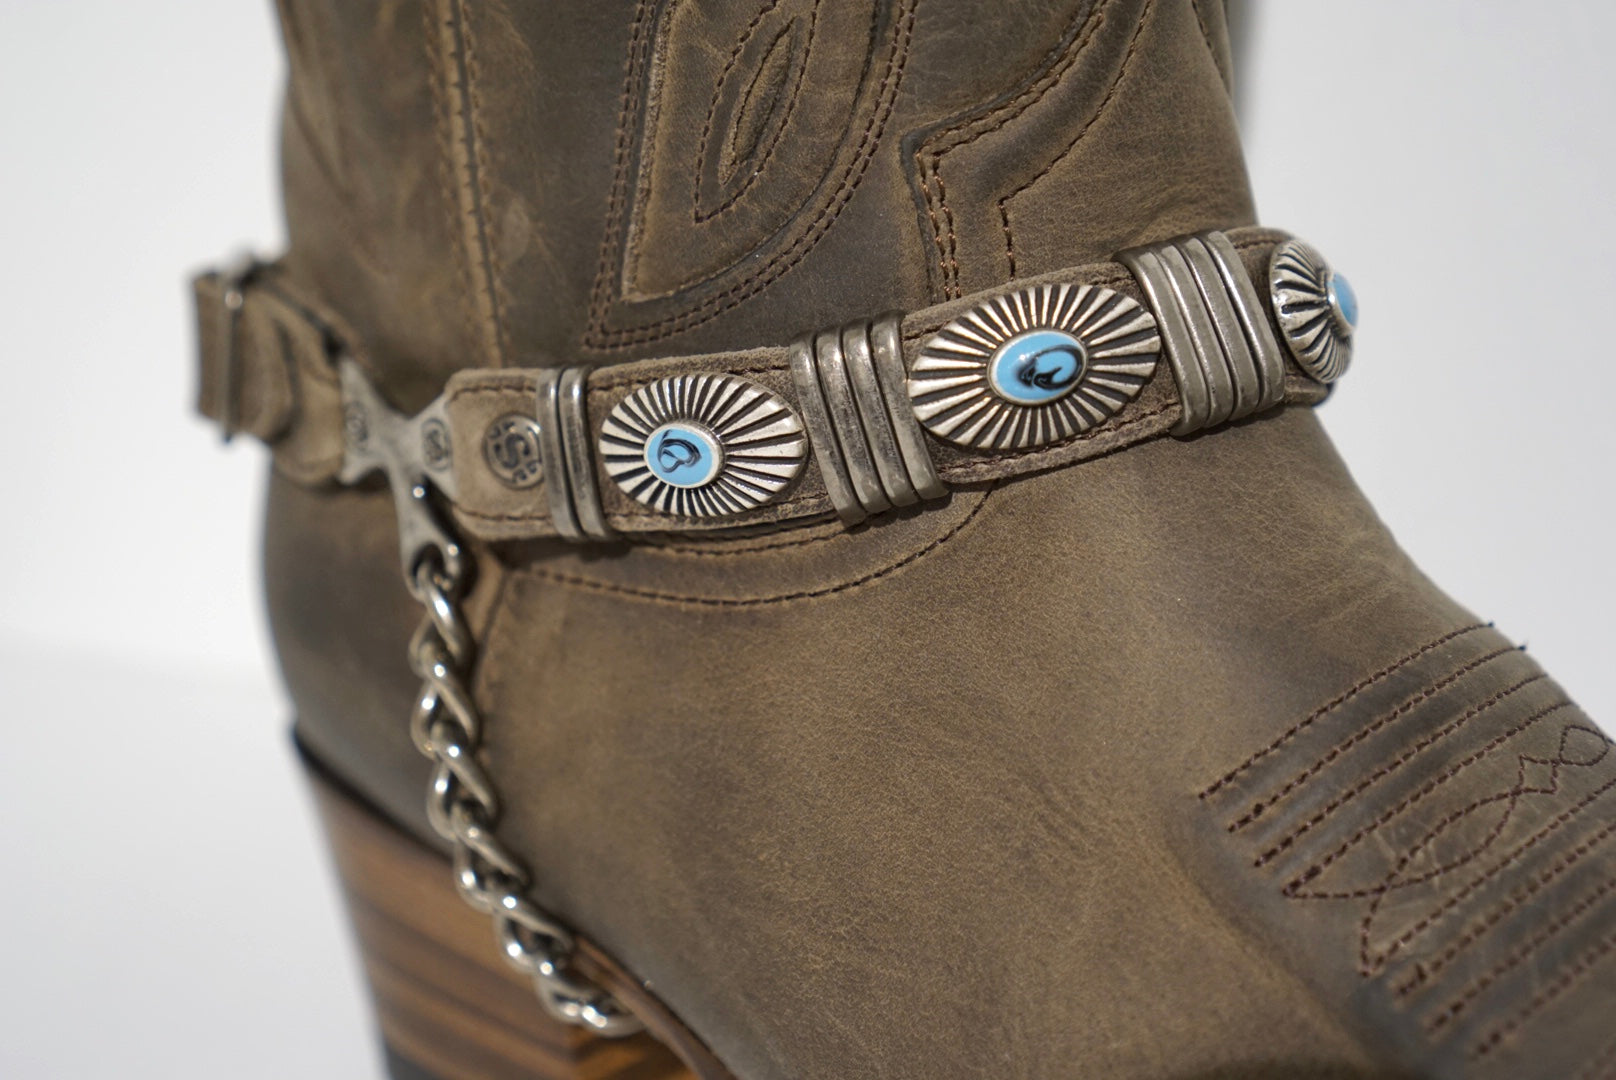 Sendra spurs - taupe with turquoise conchos